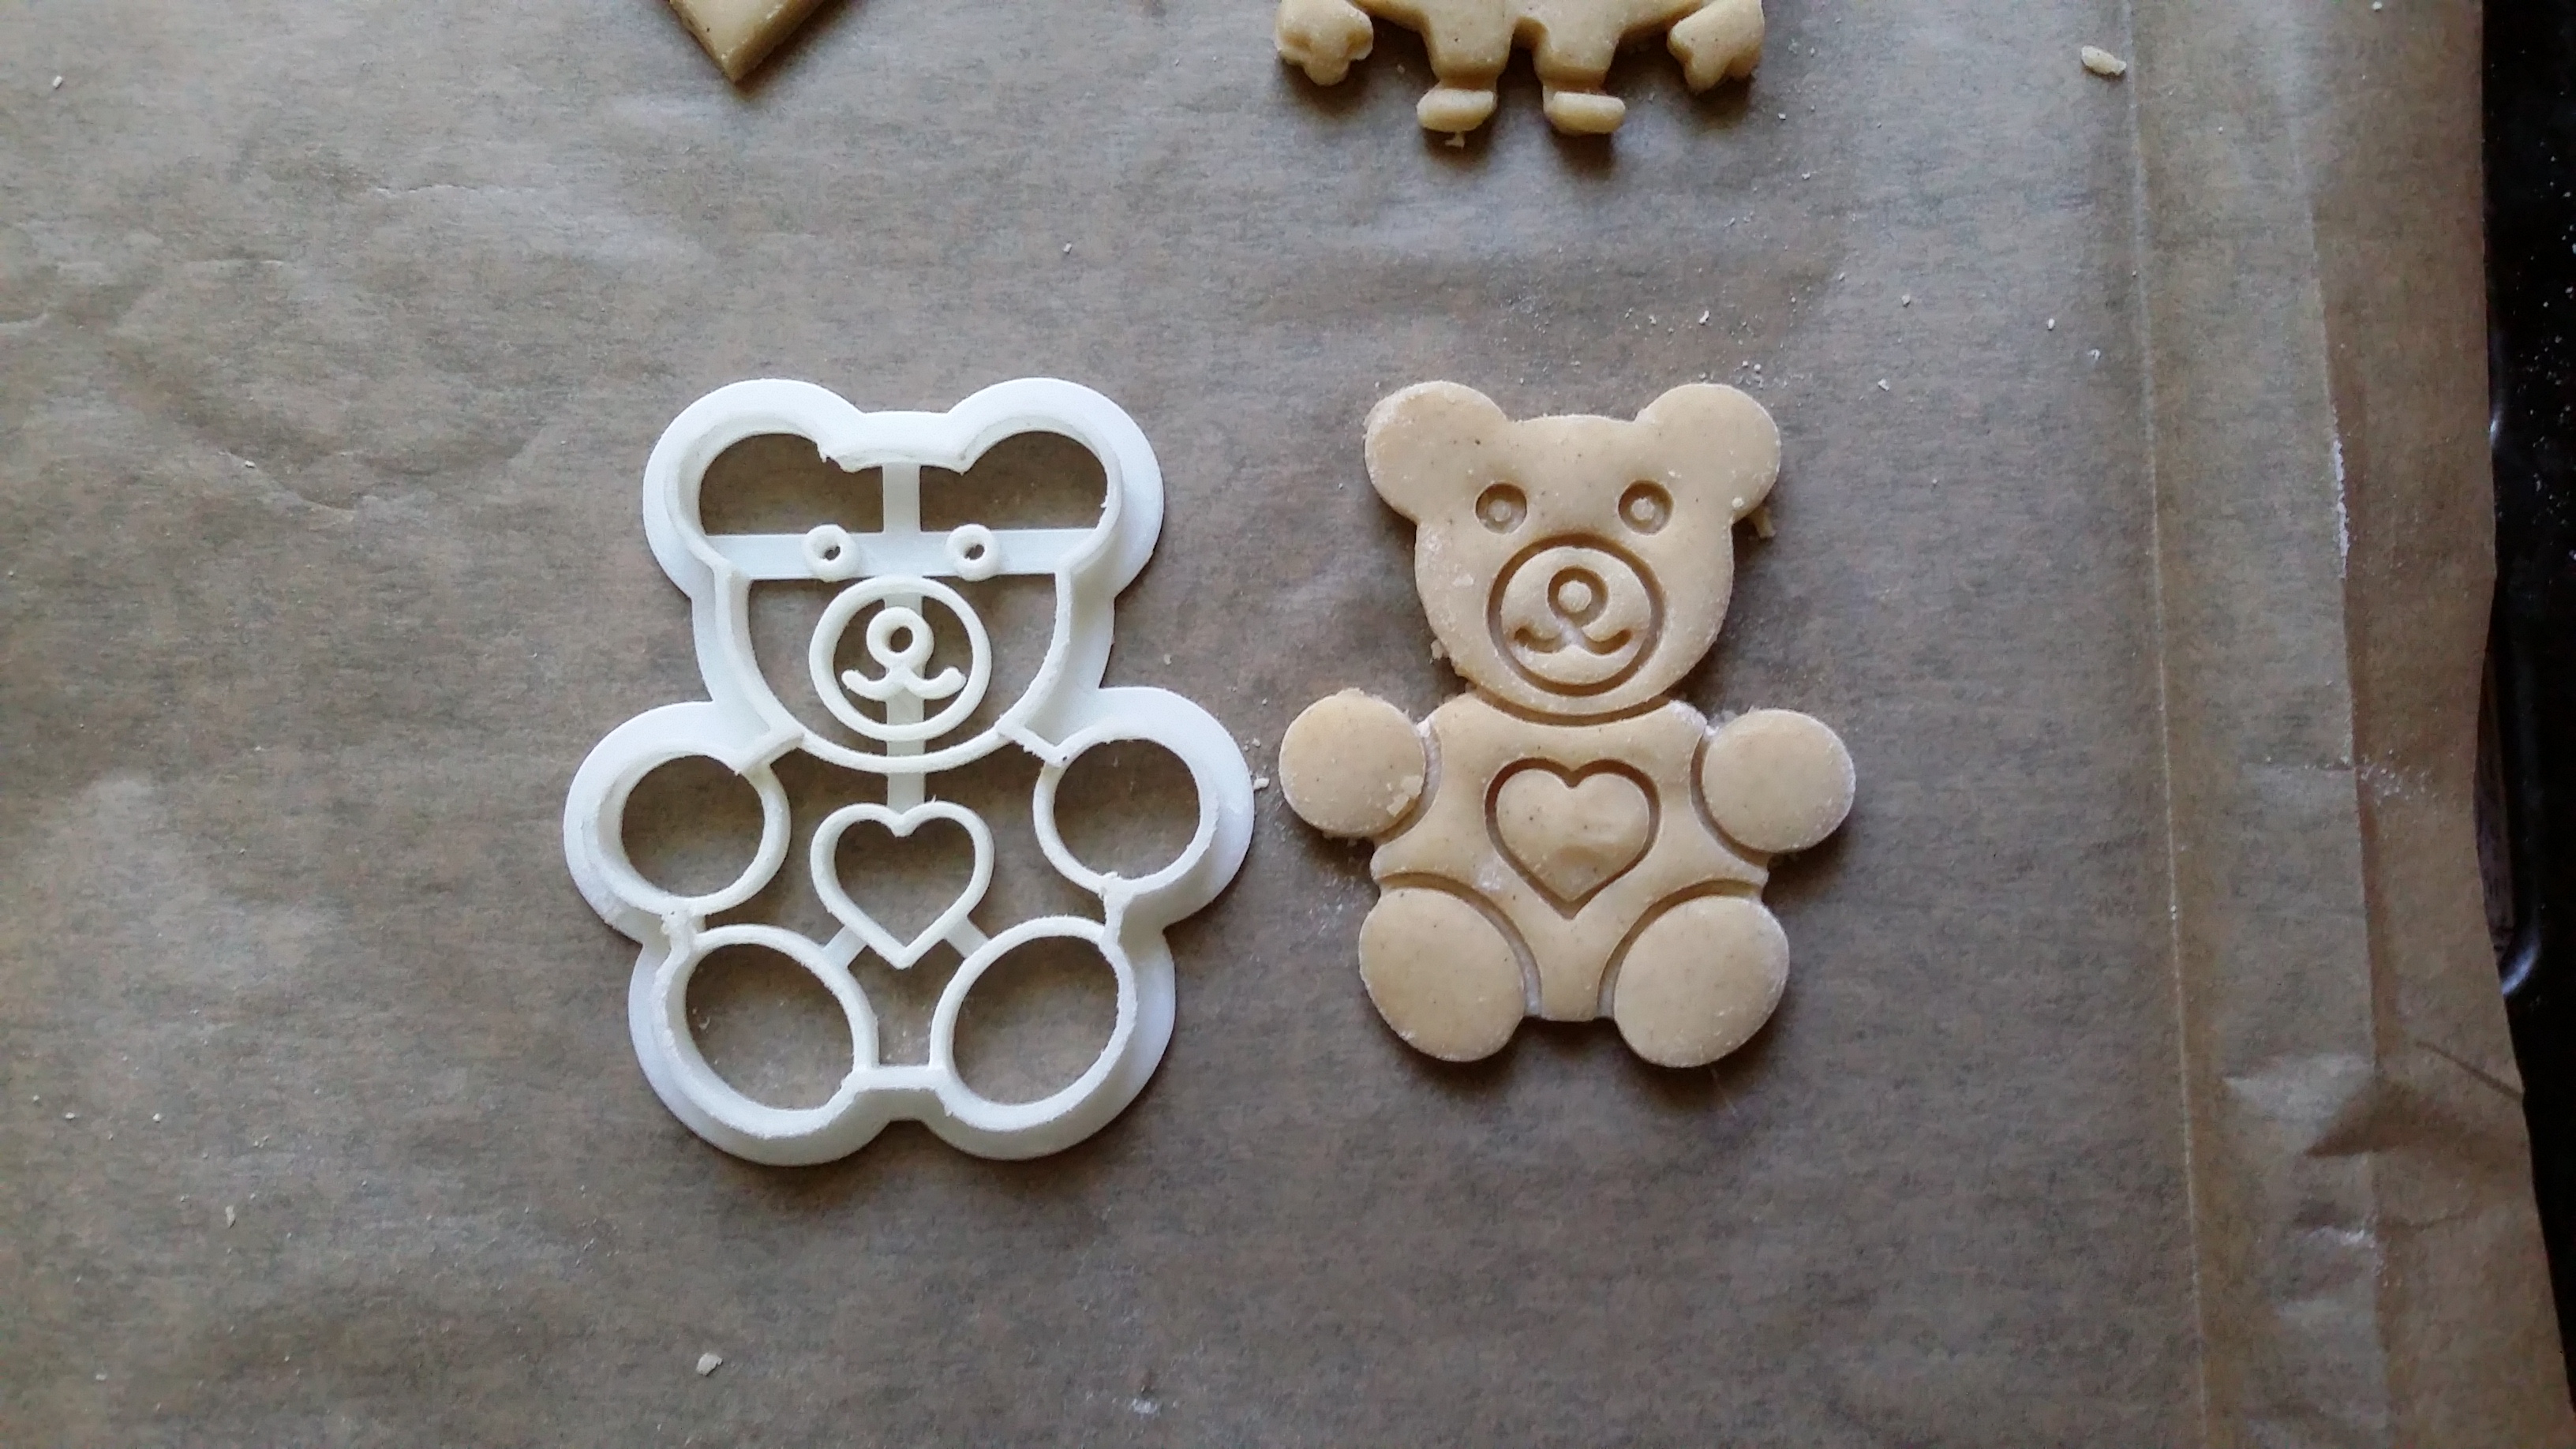 3D Printed Teddy Bear Cookie Cutter by Protonik